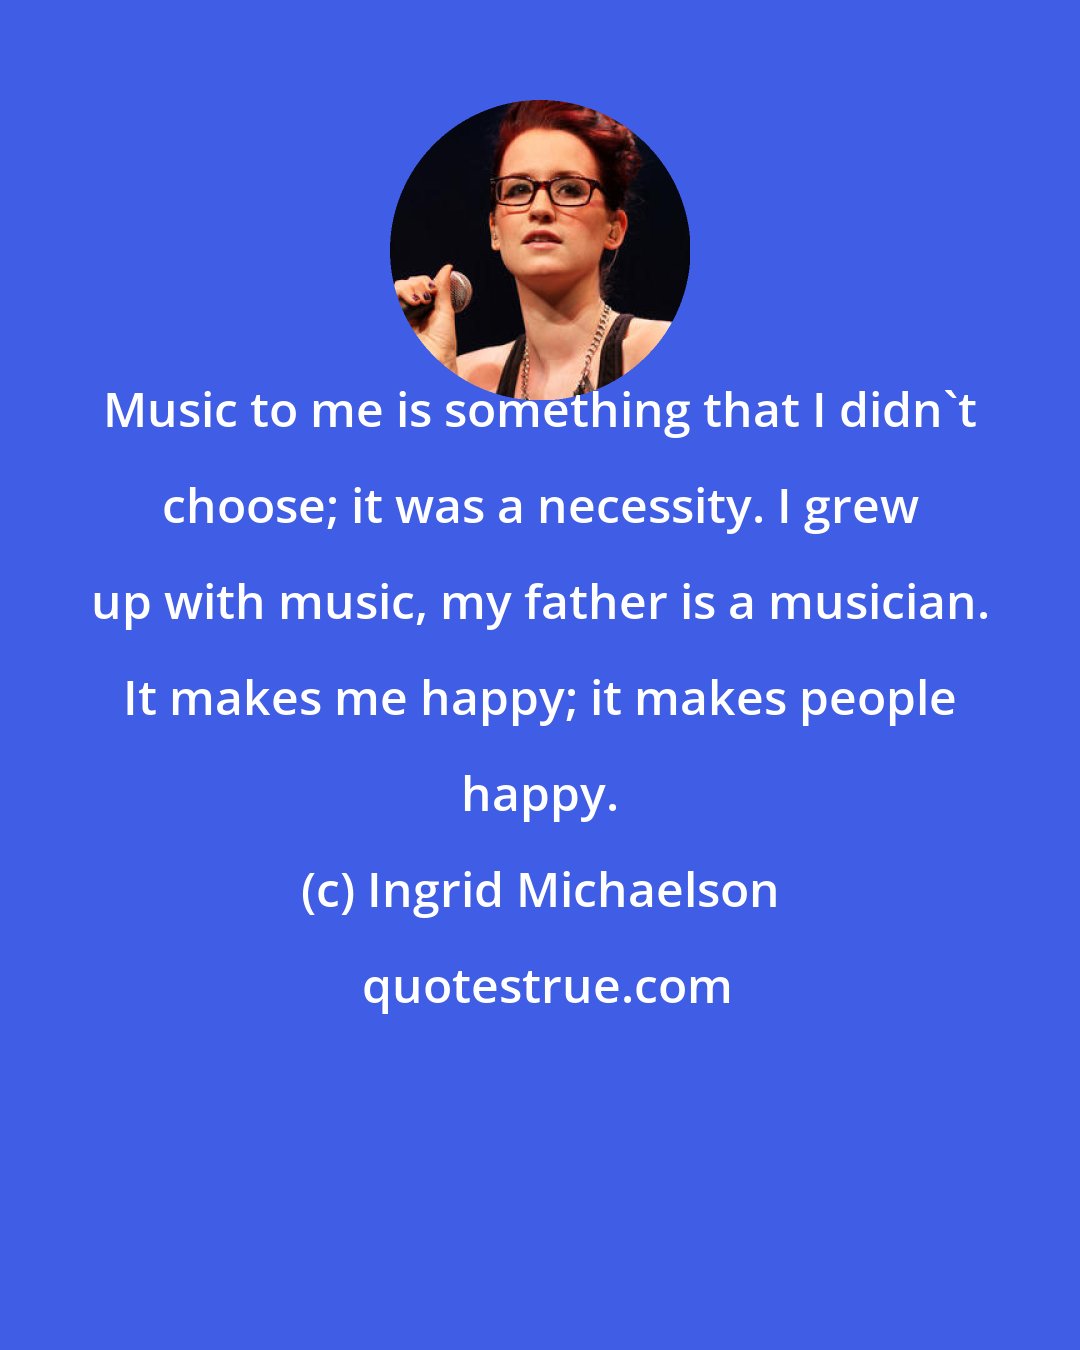 Ingrid Michaelson: Music to me is something that I didn't choose; it was a necessity. I grew up with music, my father is a musician. It makes me happy; it makes people happy.